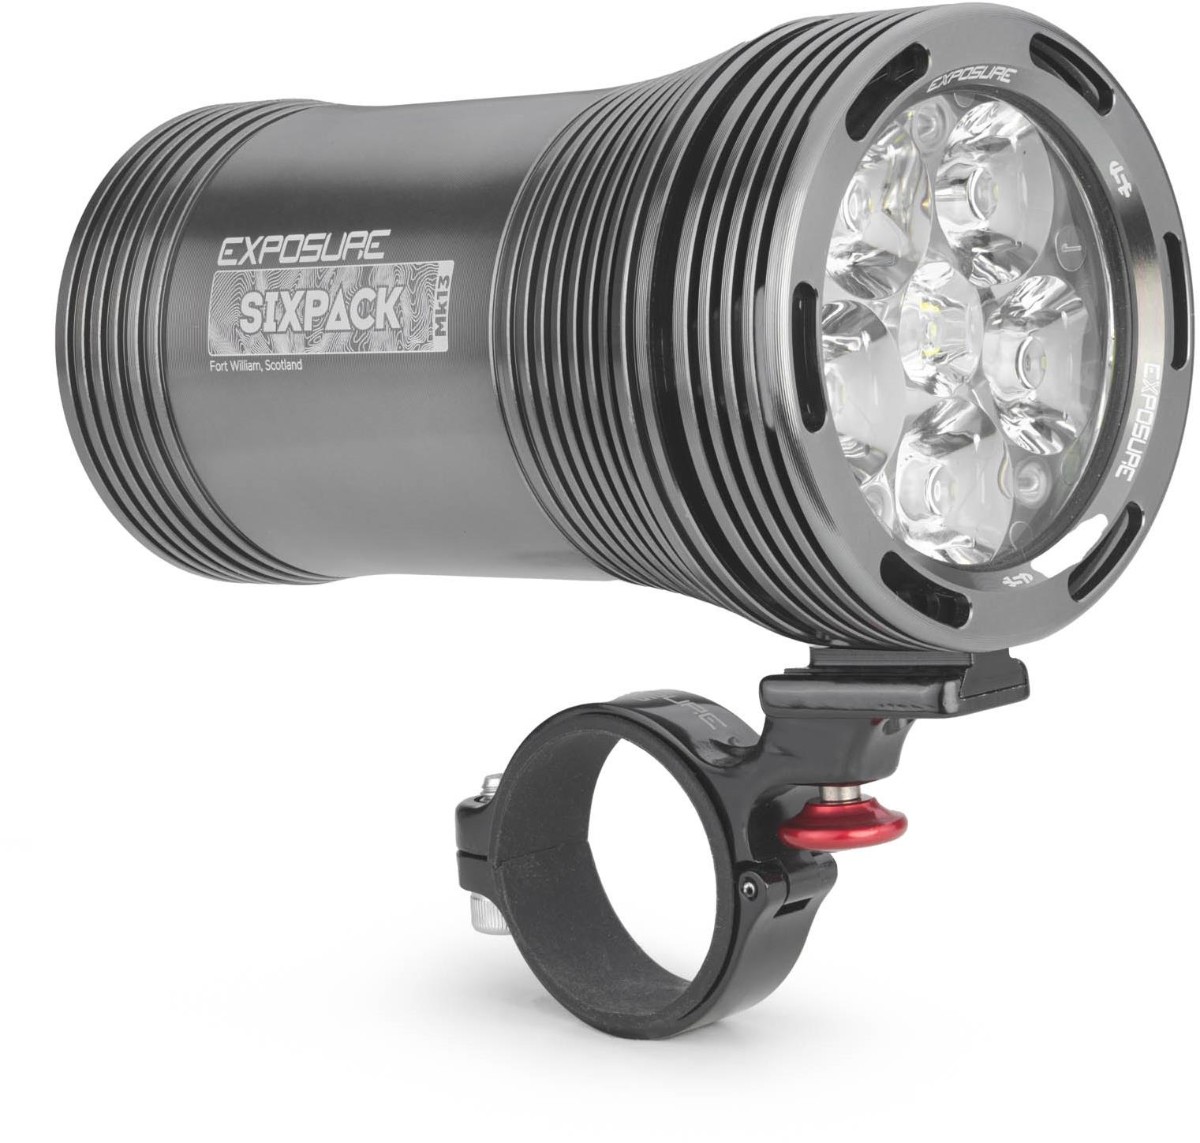 Exposure Six Pack Mk13 Front Light product image